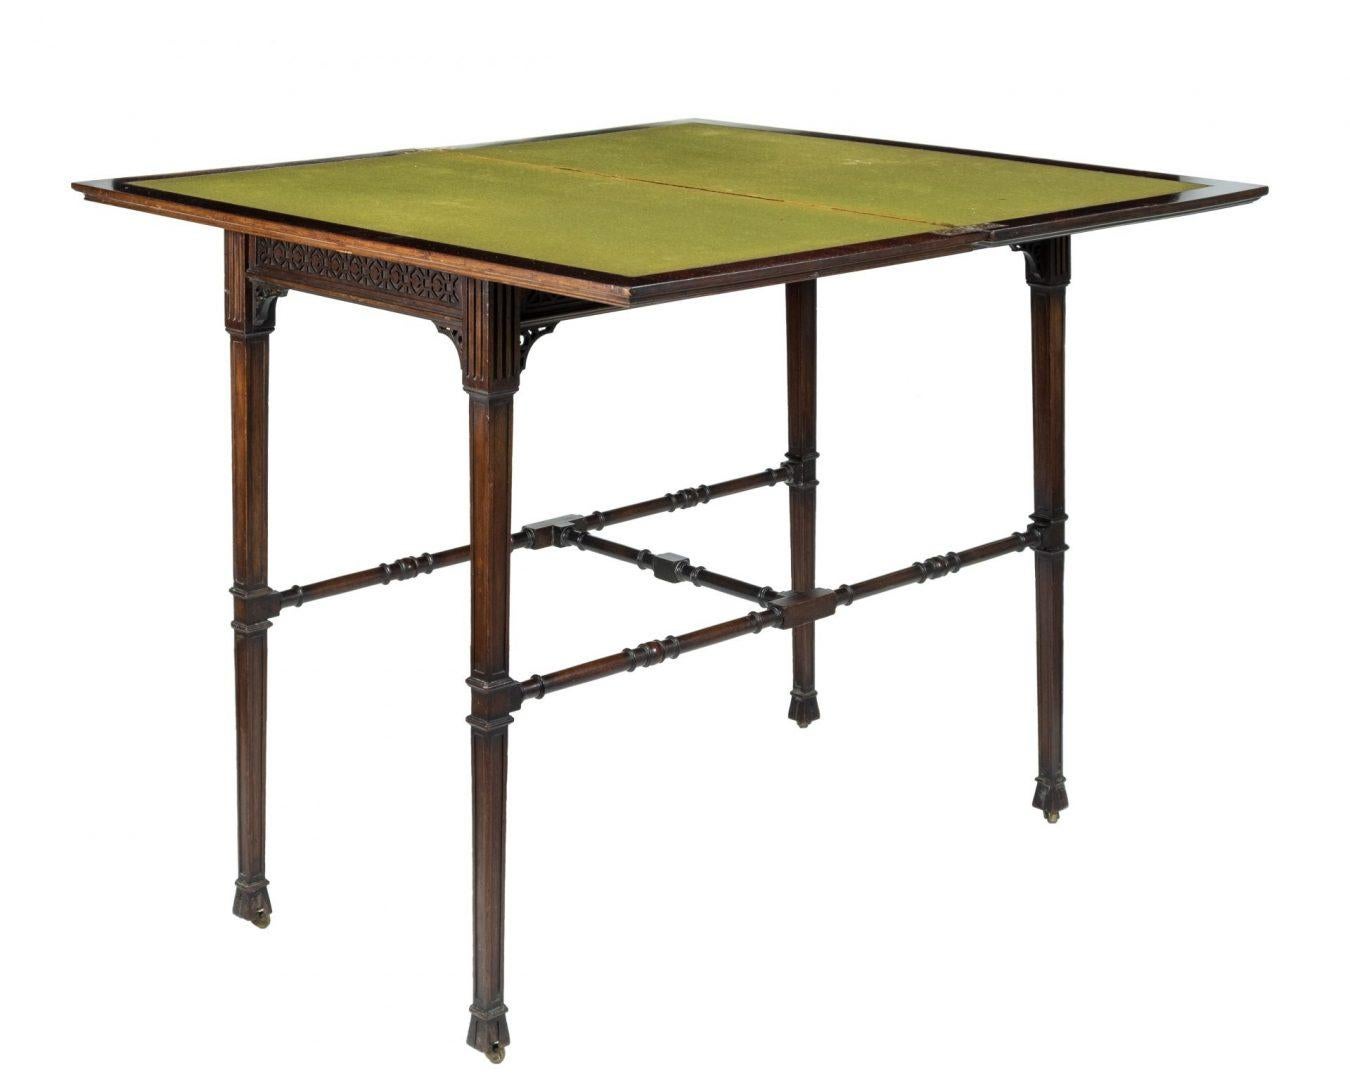 19th Century Late 19th-Early 20th Century Gillow & Co. Card Table